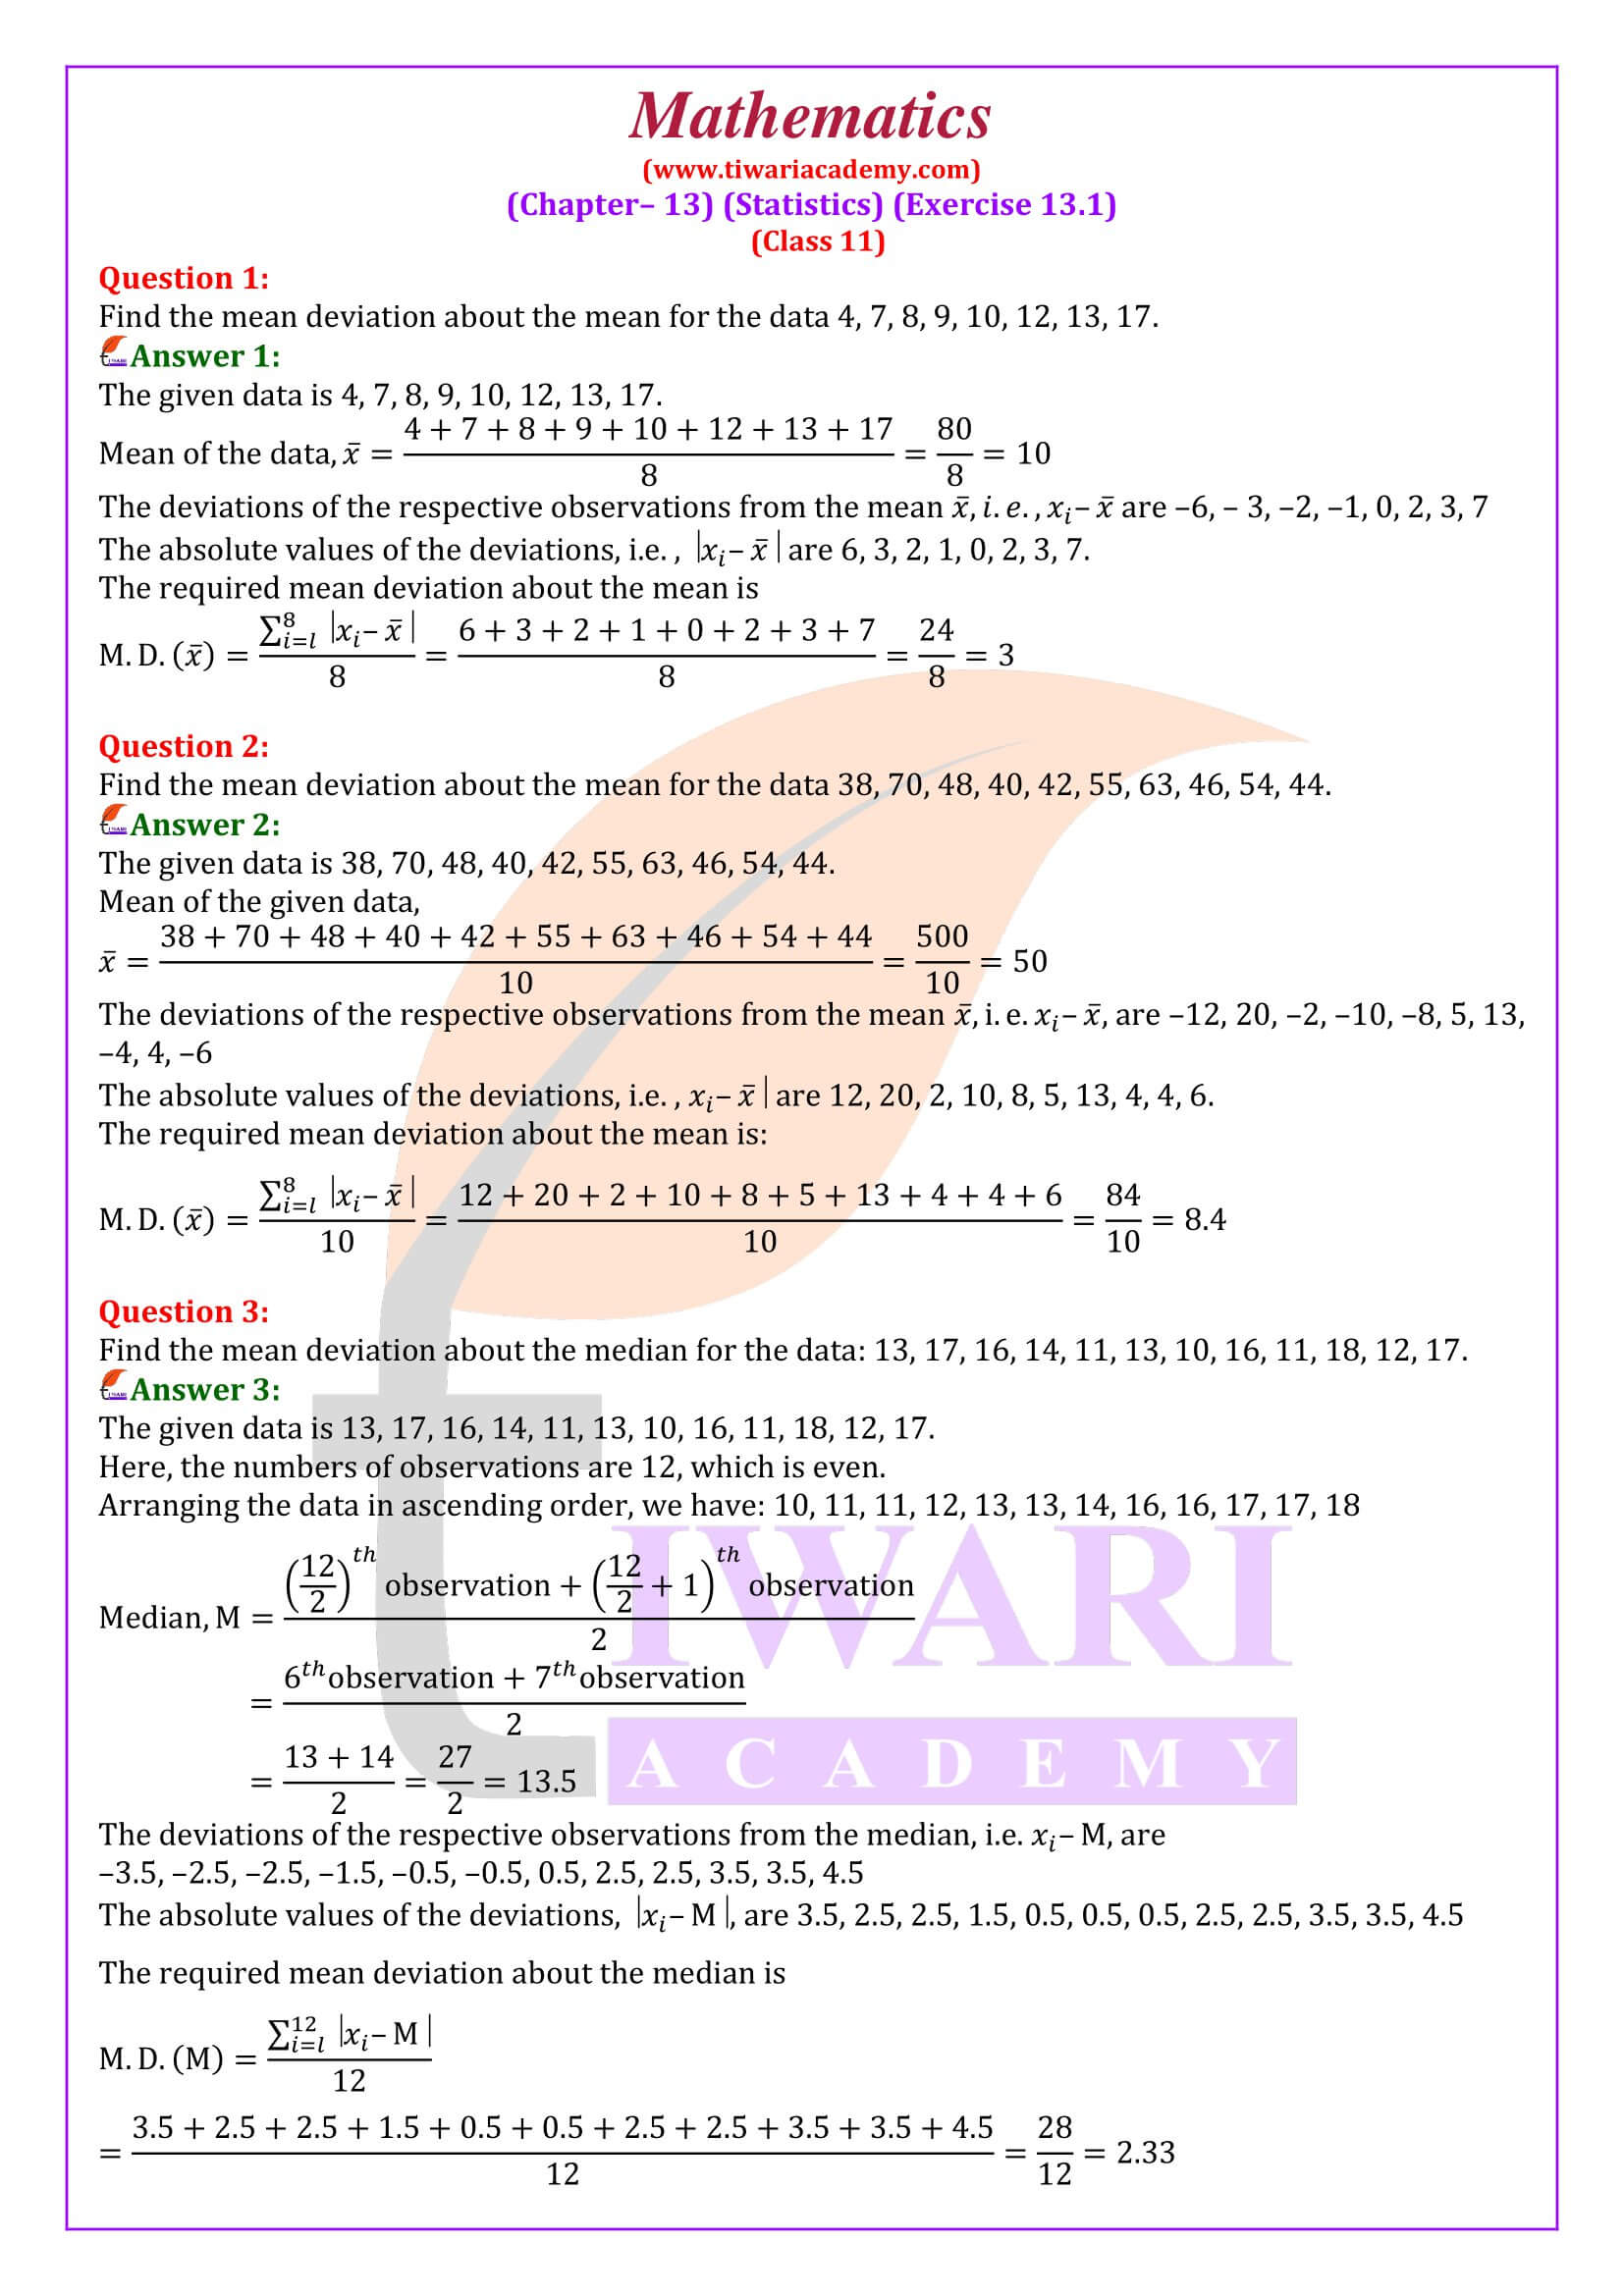 NCERT Solutions for Class 11 Maths Chapter 13 Exercise 13.1 in English Medium